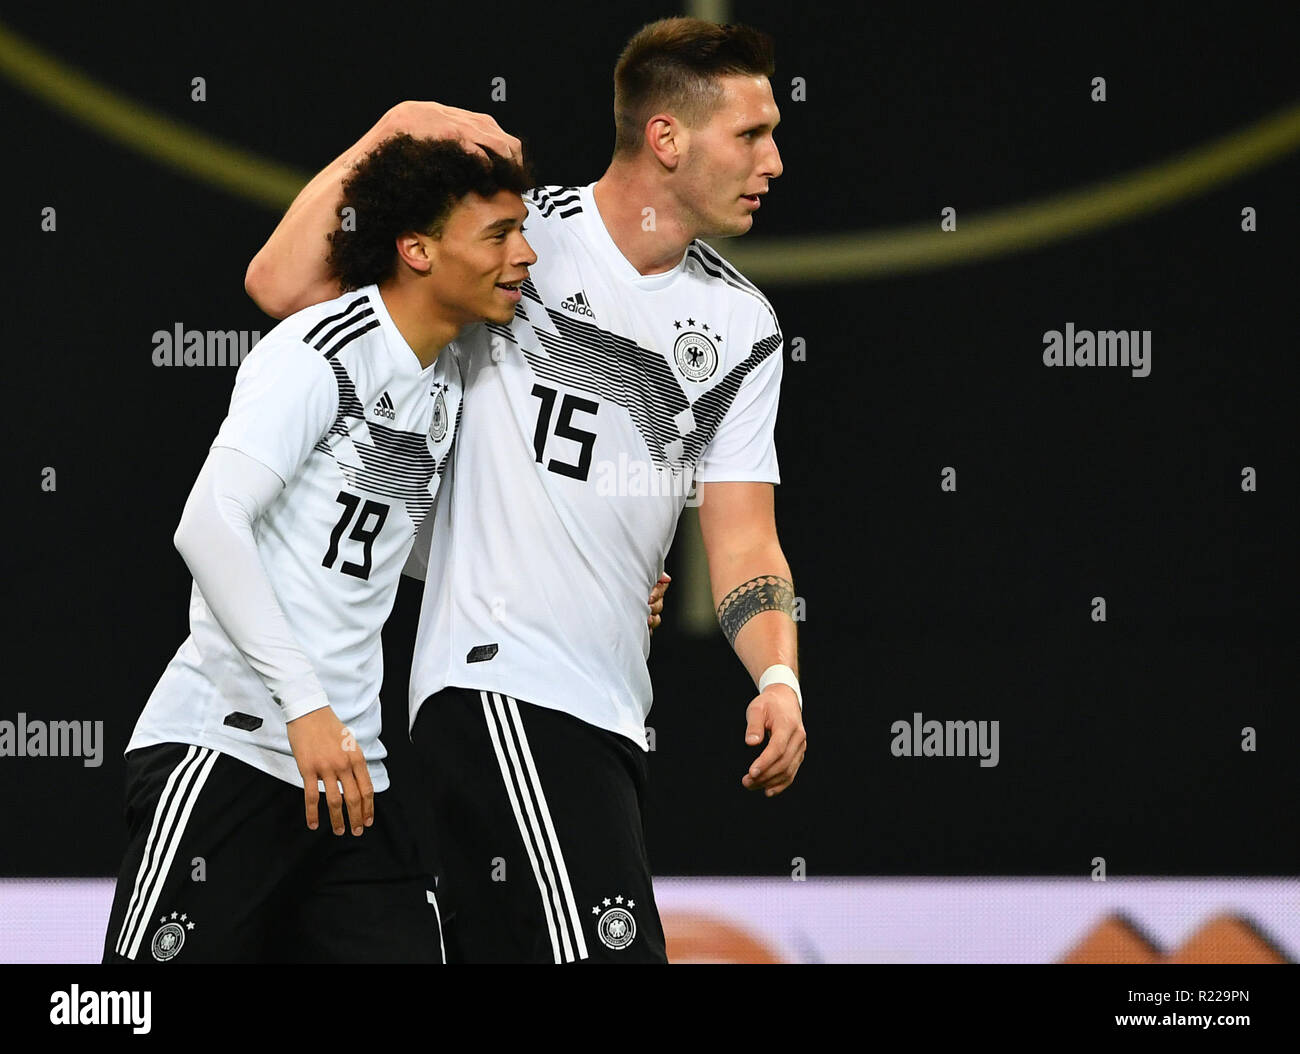 Leipzig, Germany. 15th Nov, 2018. Soccer: International matches, Germany - Russia in the RB Arena. The two scorers Leroy Sane (l) from Germany and Niklas Süle cheer over a goal. Credit: Soeren Stache/dpa/Alamy Live News Stock Photo